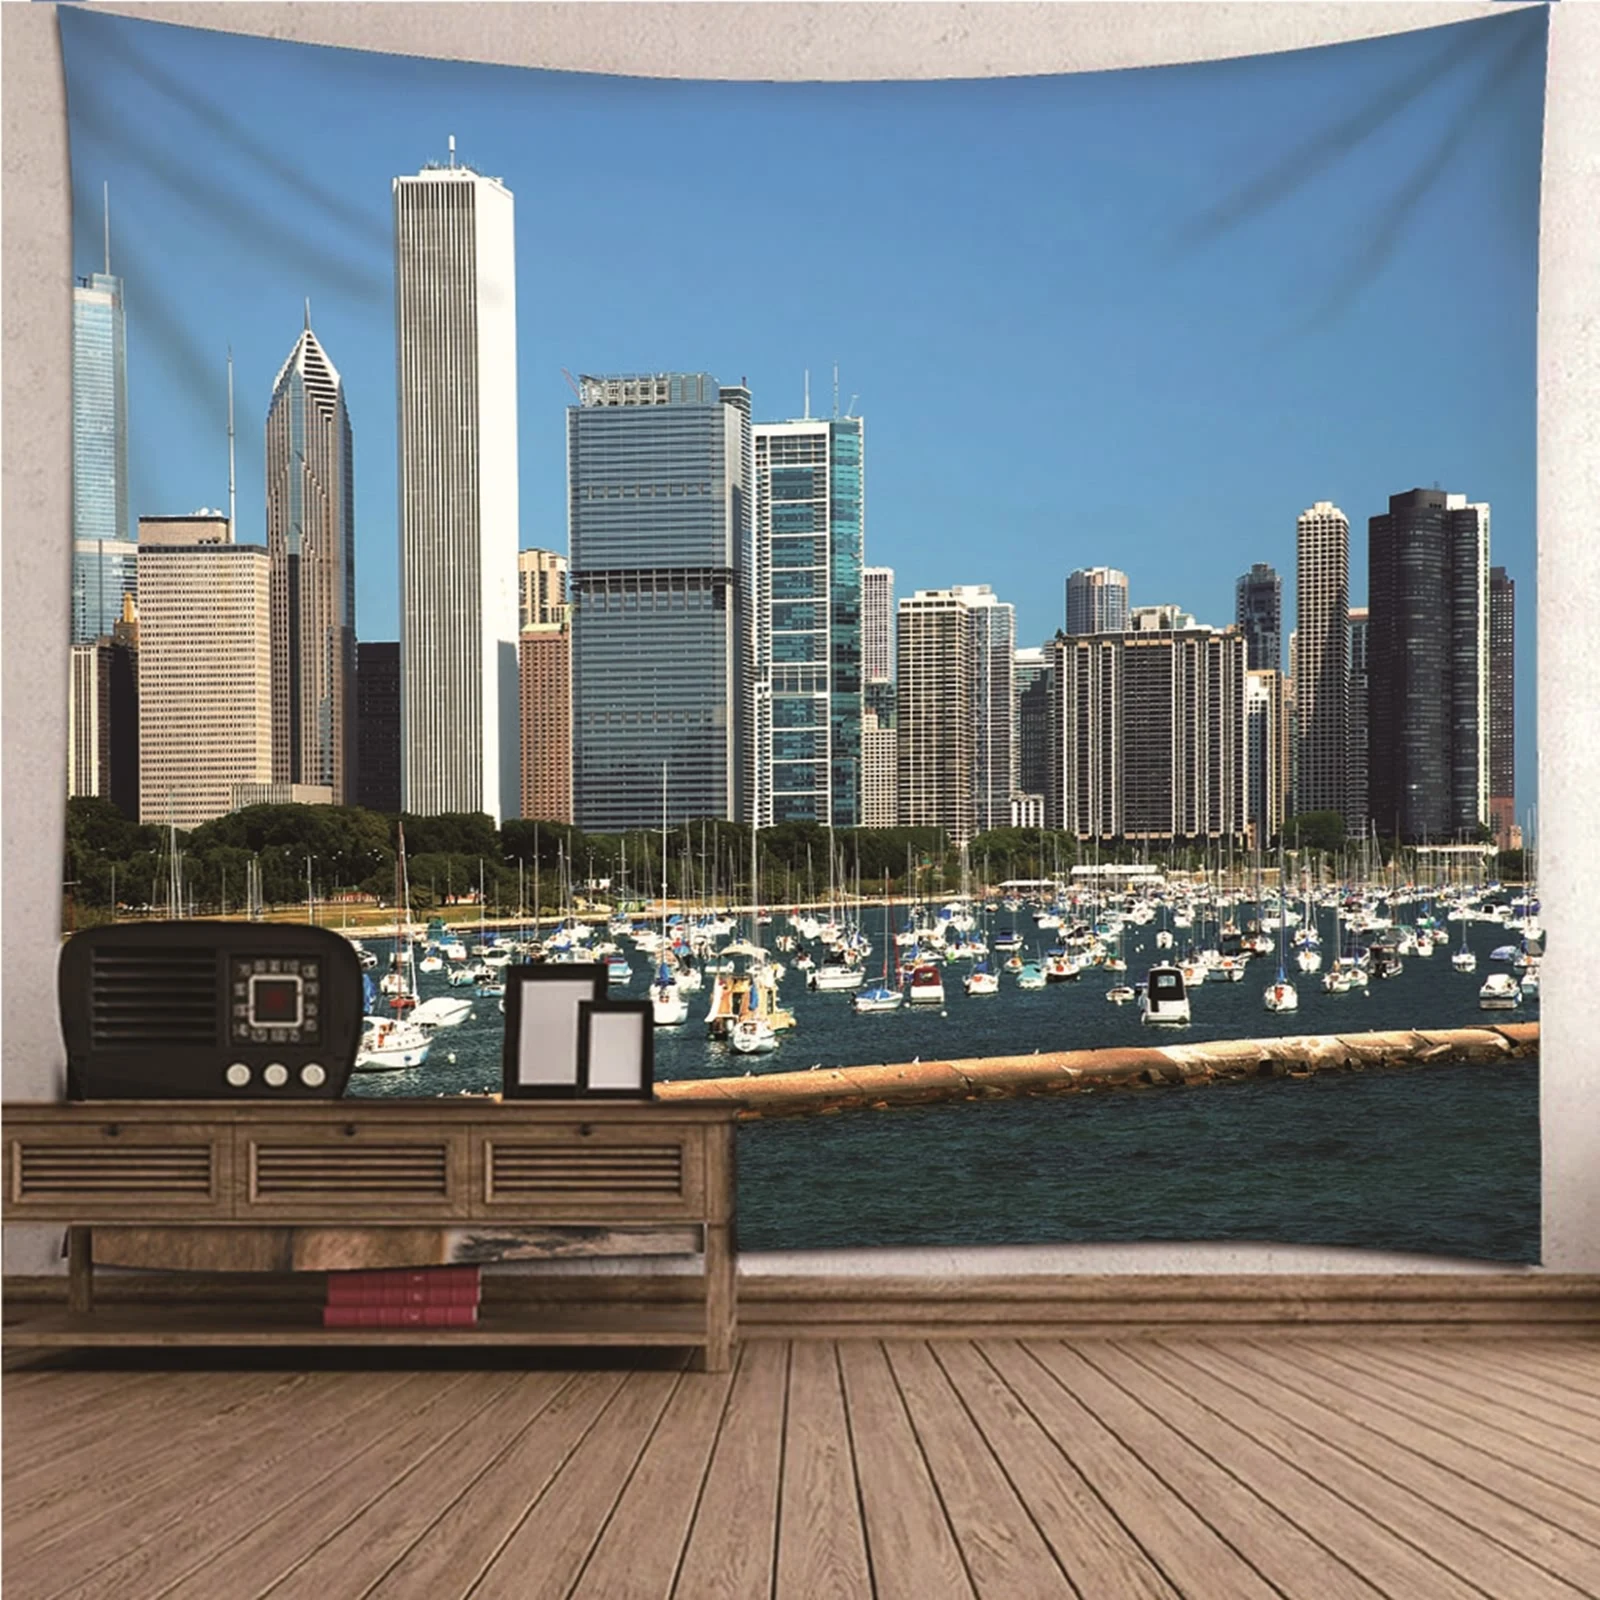 

Tapestry Art Wall Rugs Tapestries natural scenery Coastal Cities Wall Hanging Blanket Dorm Art Decor Covering